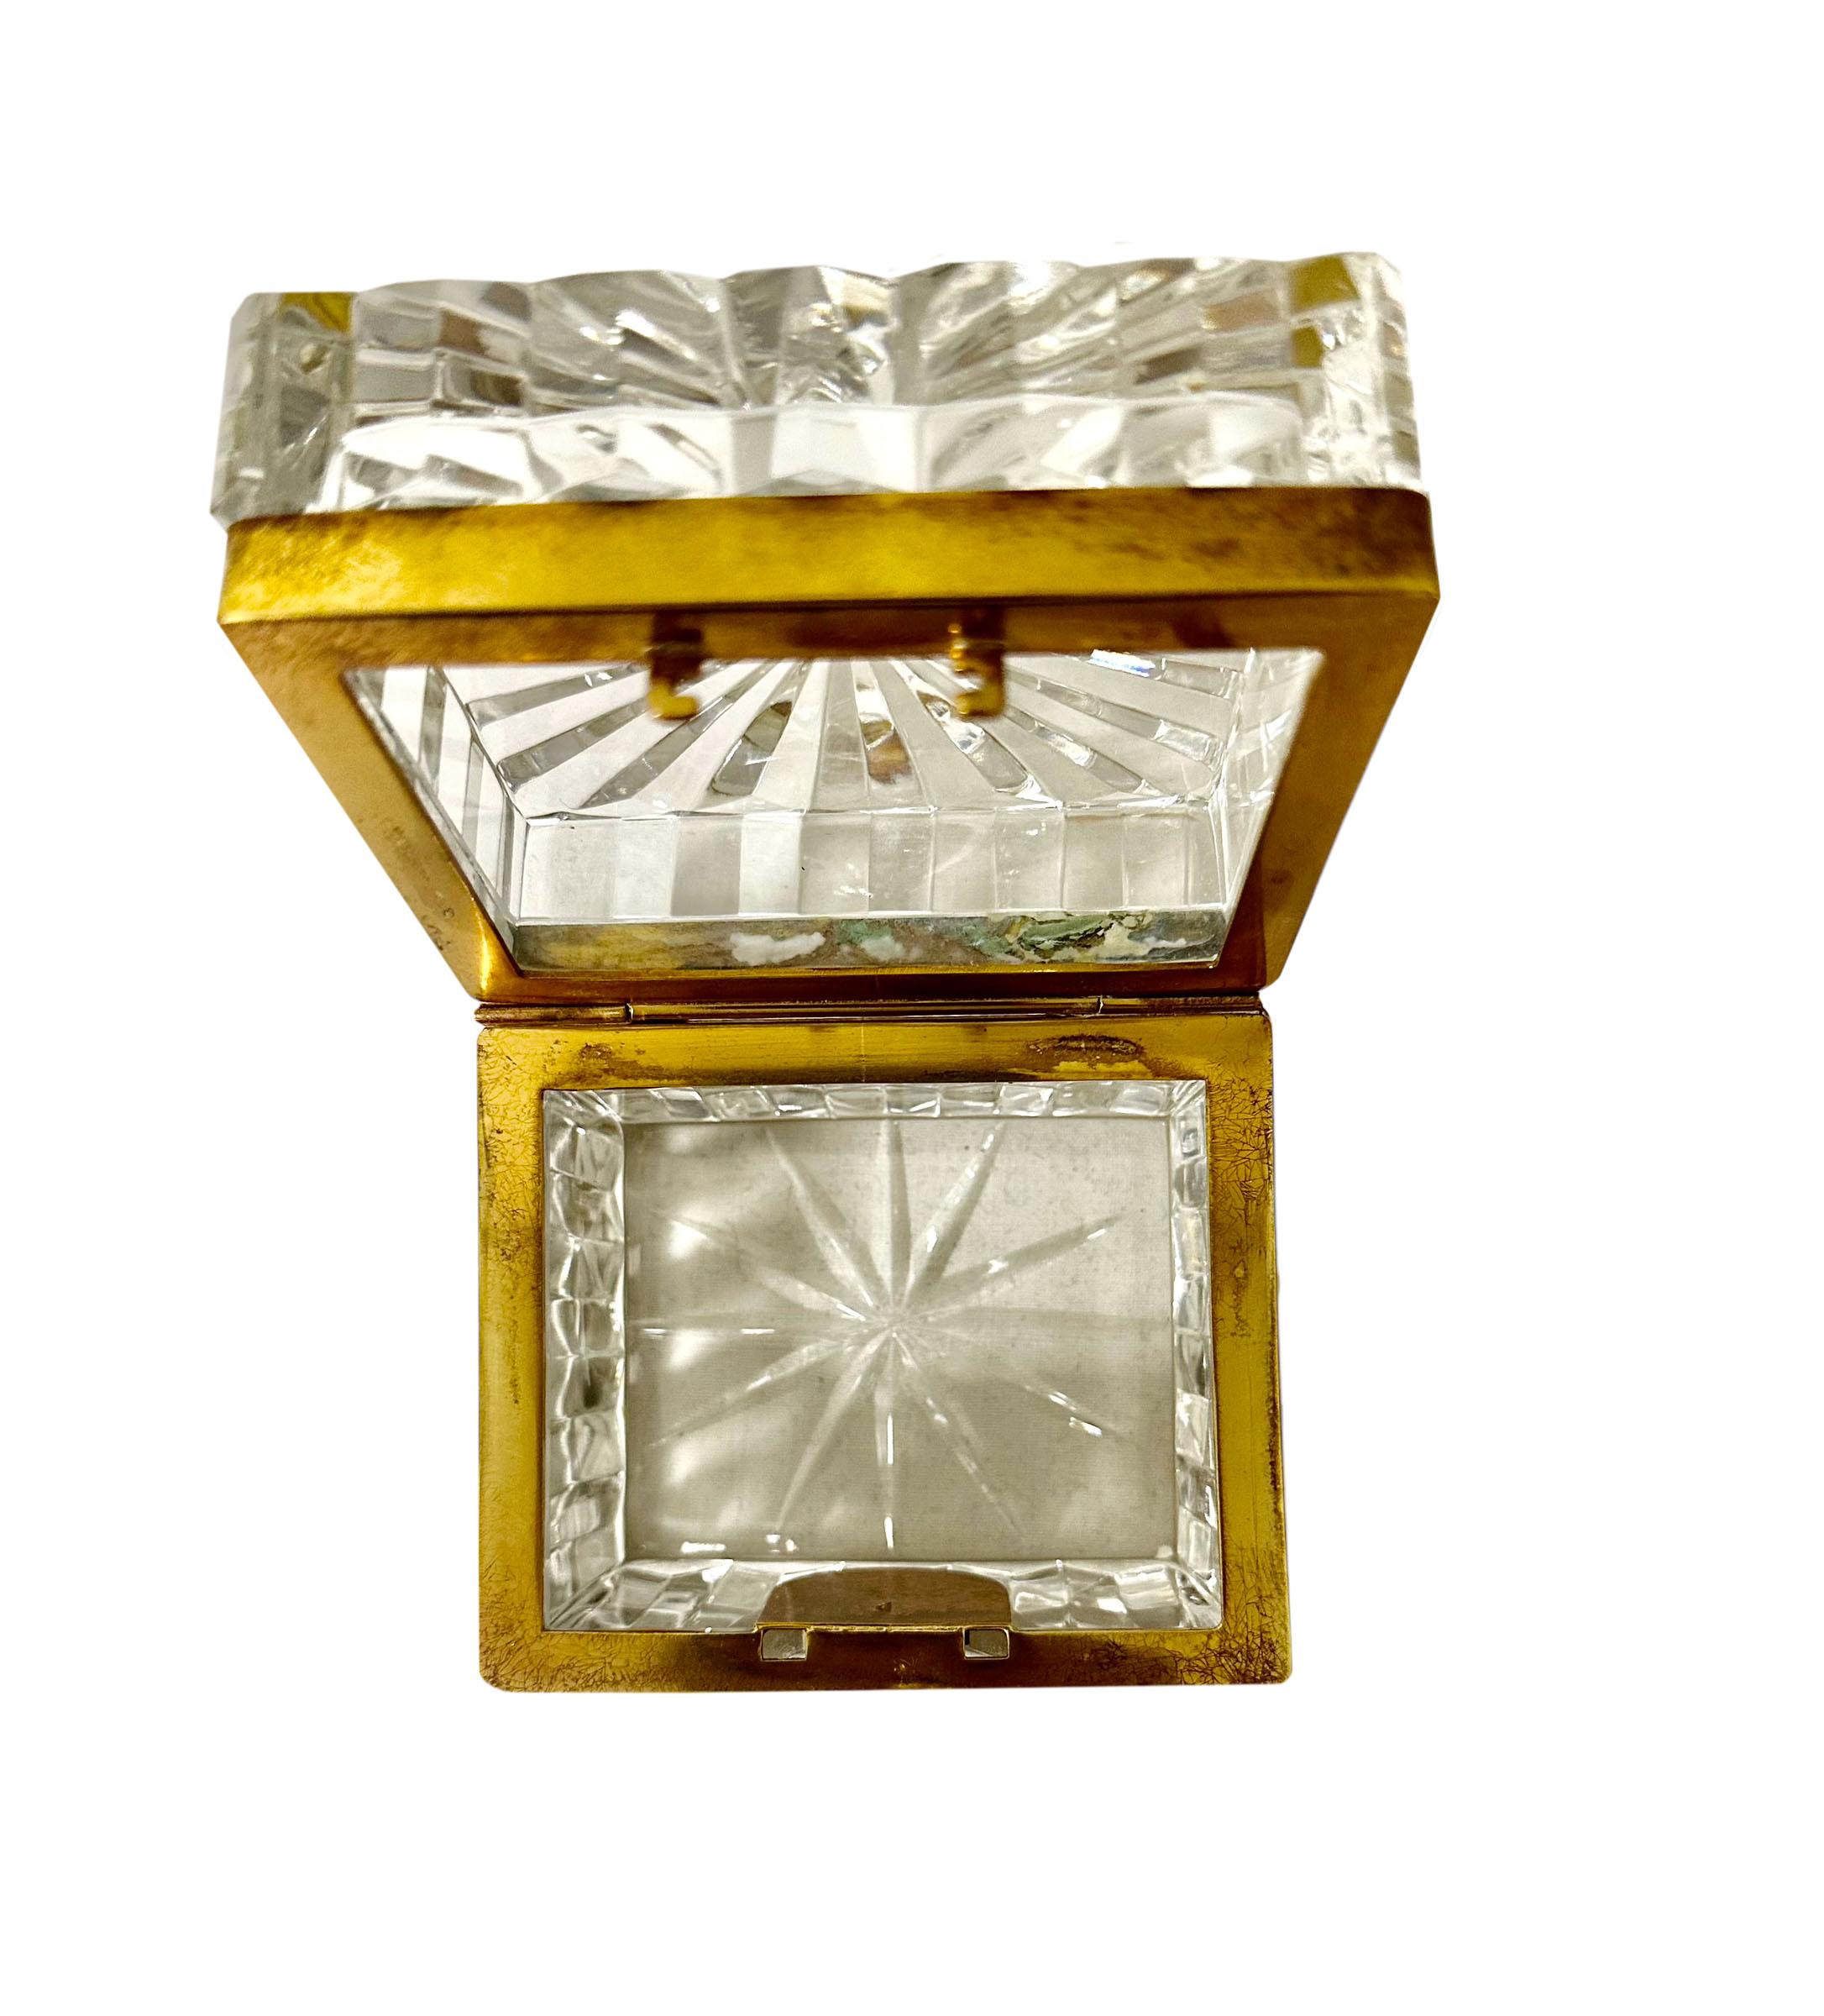 A stunning 19th century French Baccarat crystal box with bronze dore mounts and key. Not signed. This exquisite piece exudes elegance and refinement in every facet.